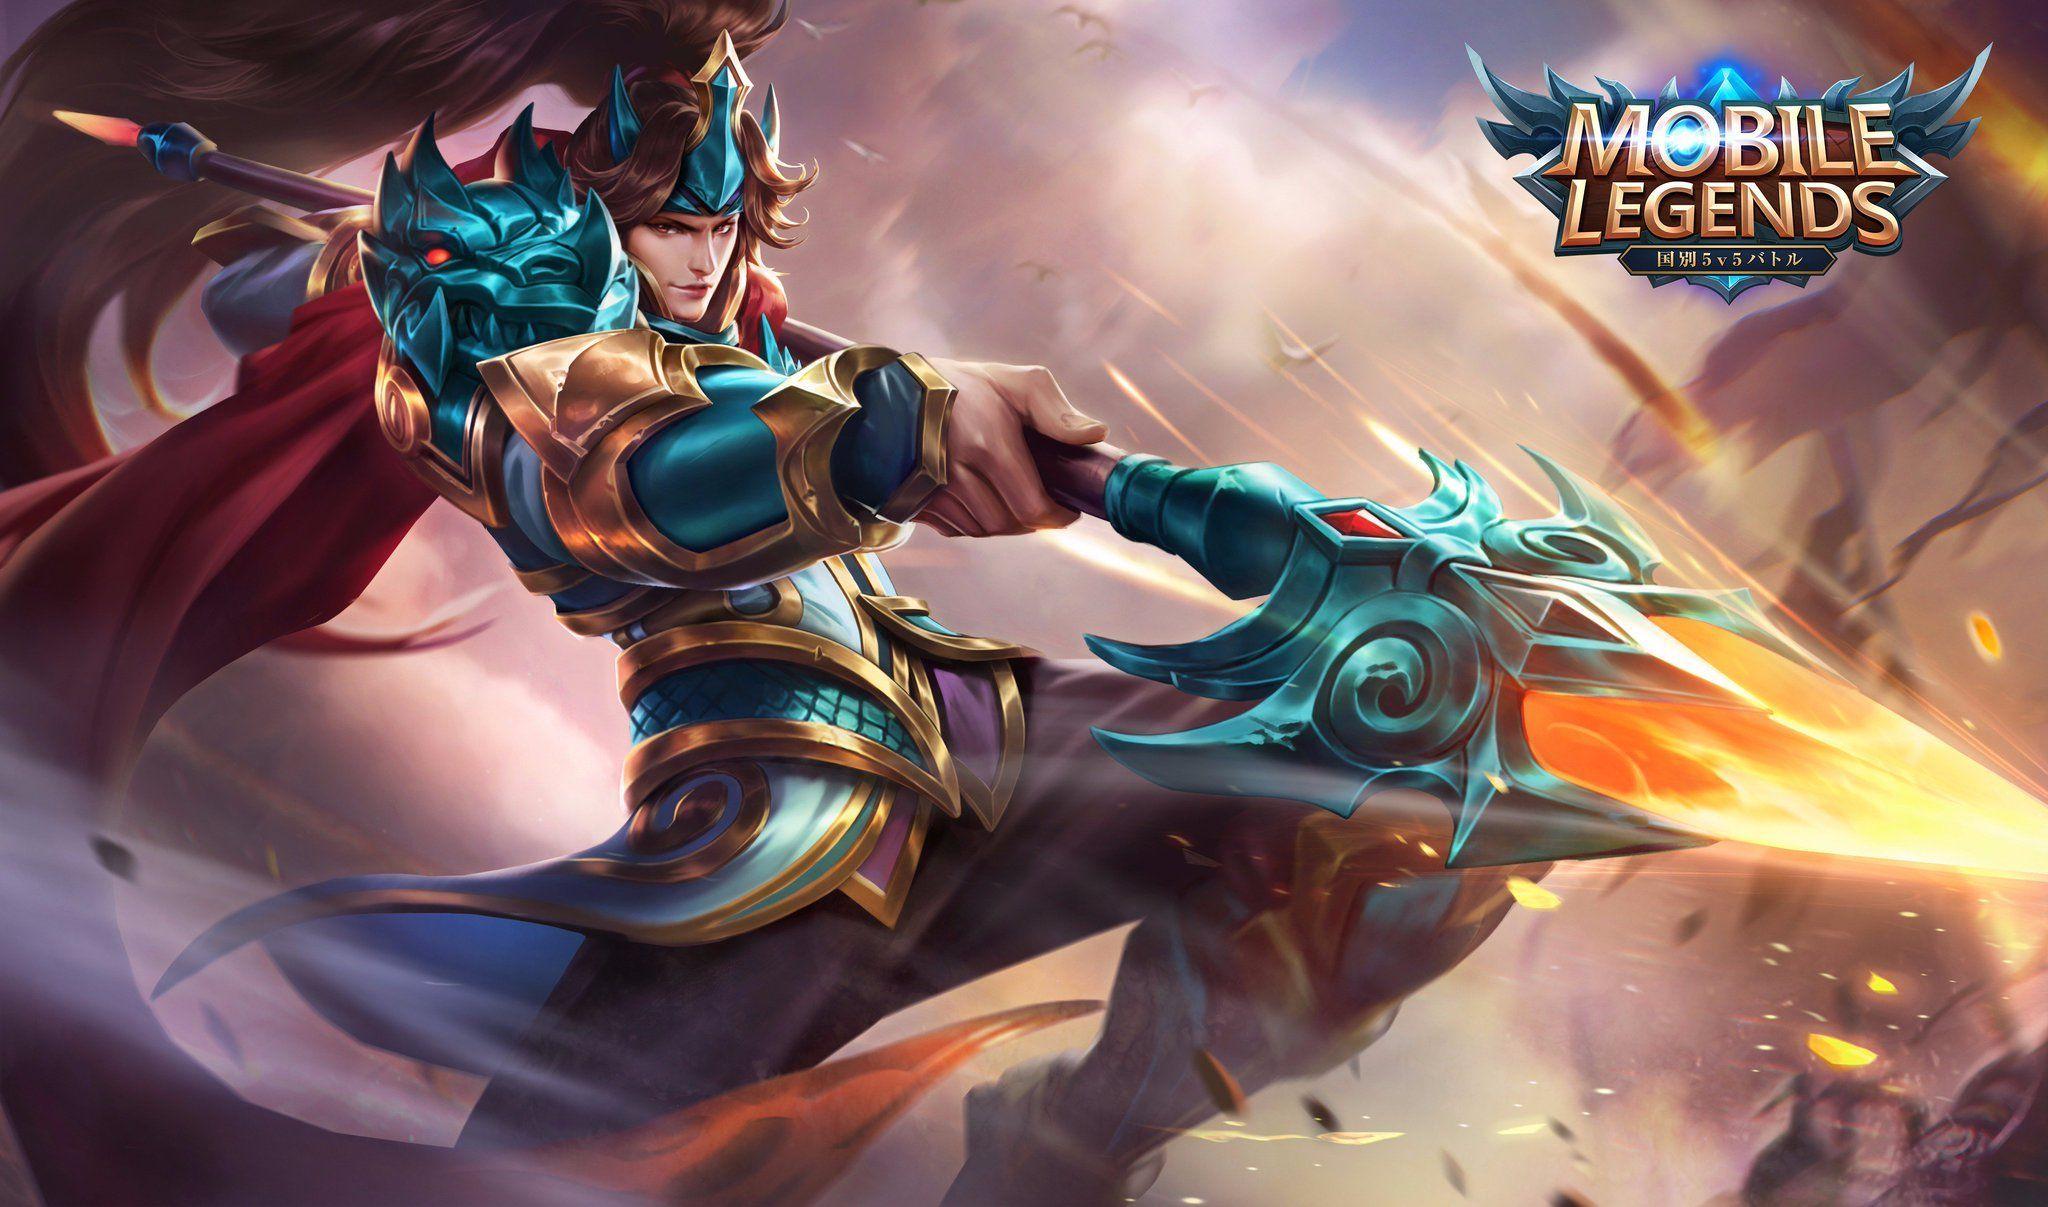 HD mobile legends wallpapers